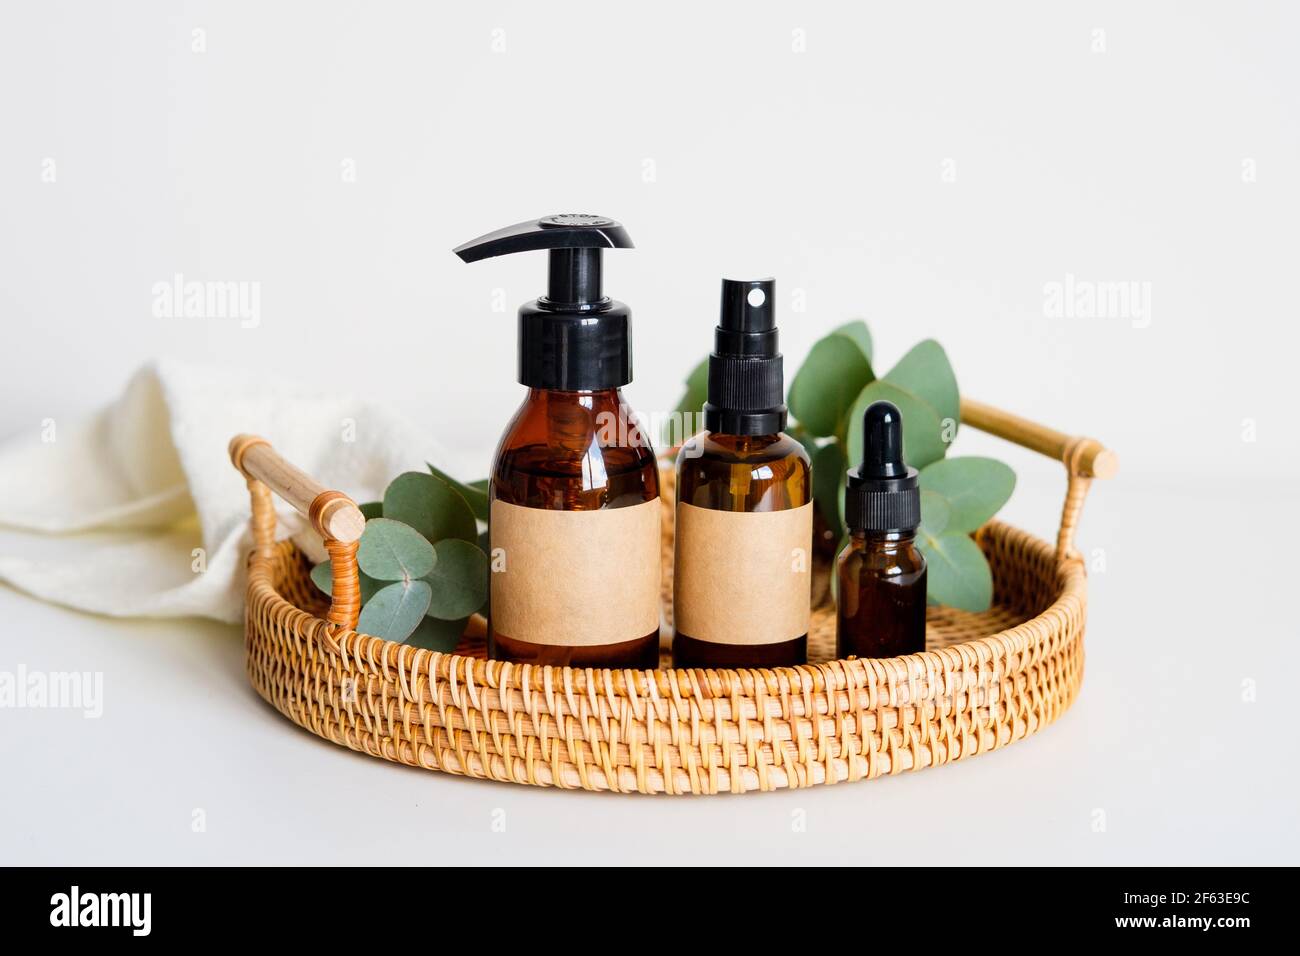 Set of eco natural organic cosmetics for personal hygiene in rattan tray. SPA beauty products design. Amber glass bottles mockups with labels. Stock Photo